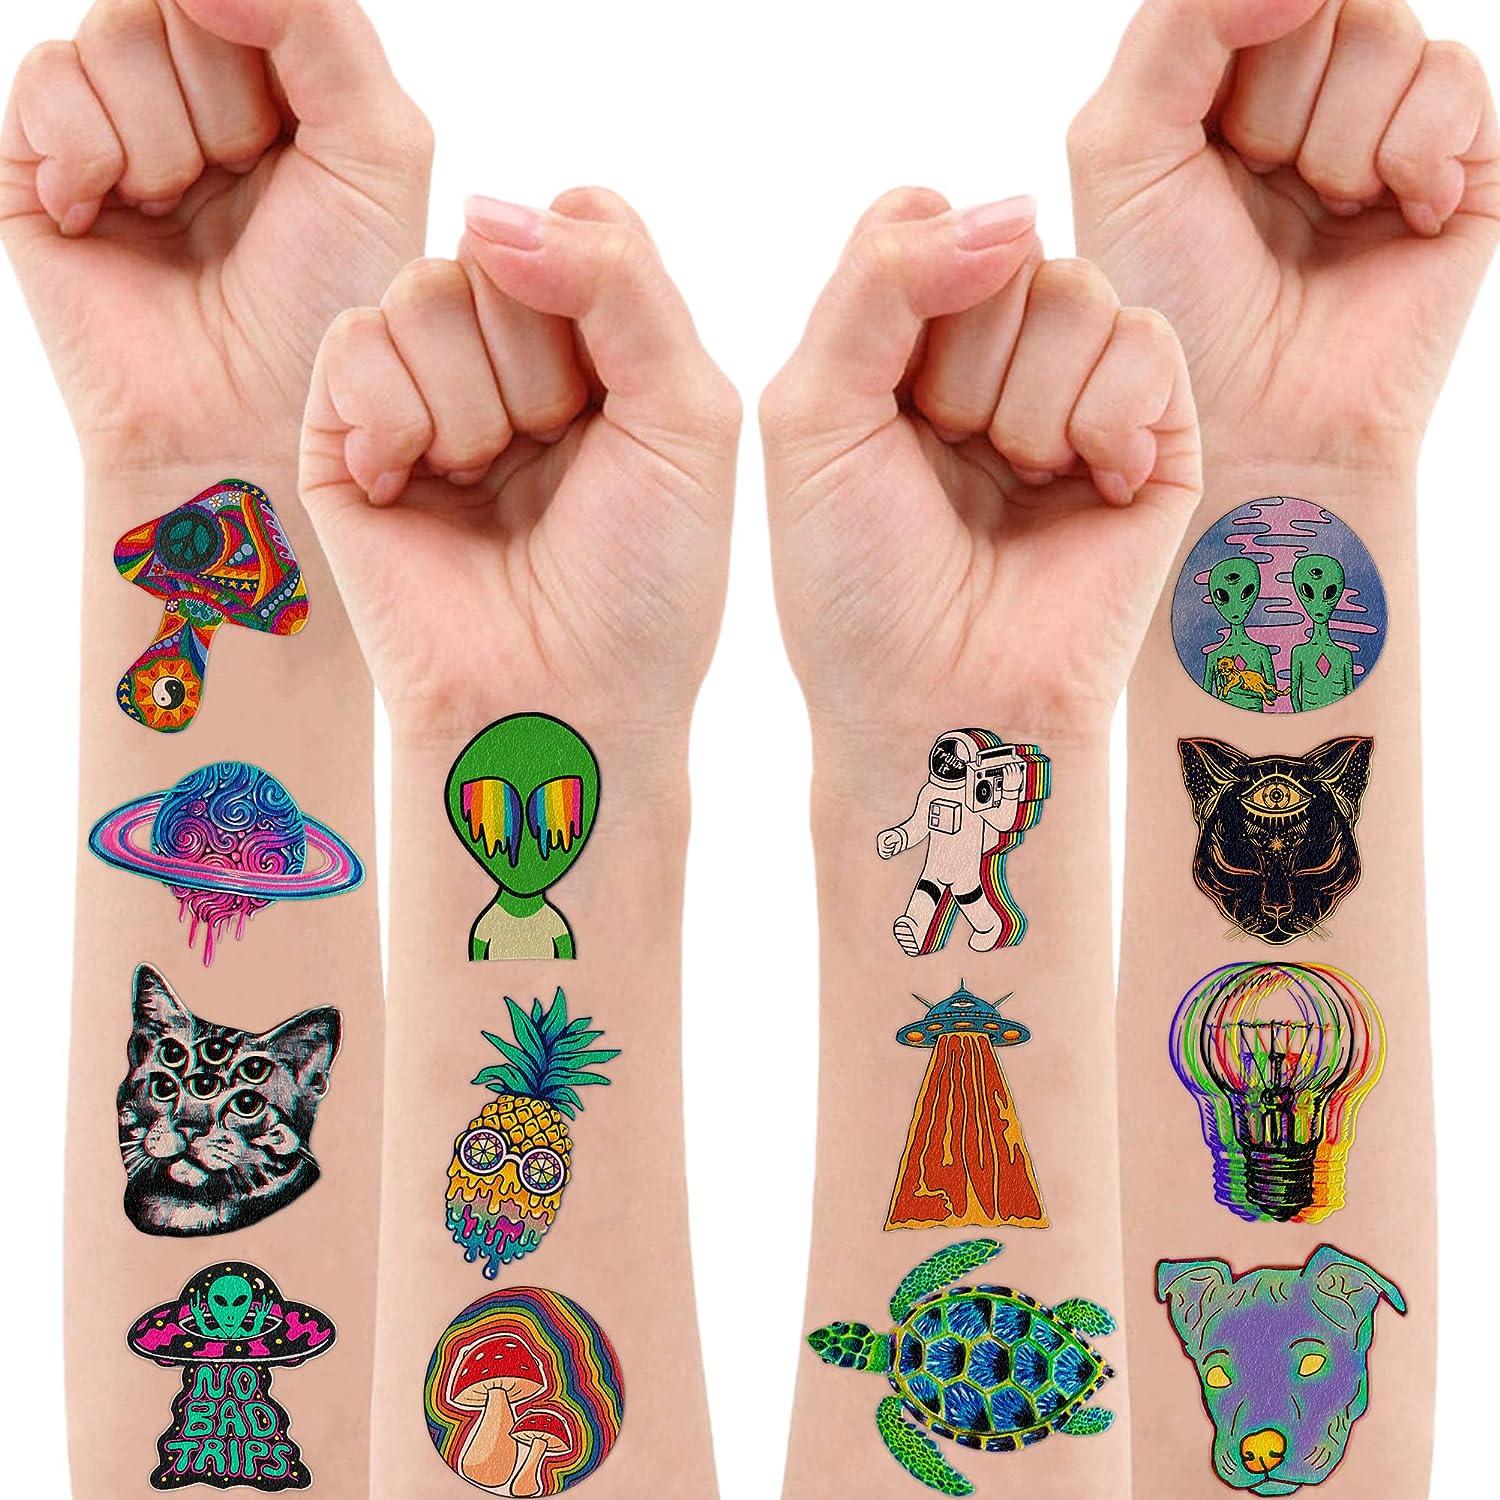 These trippy tattoos are some real mind-melters